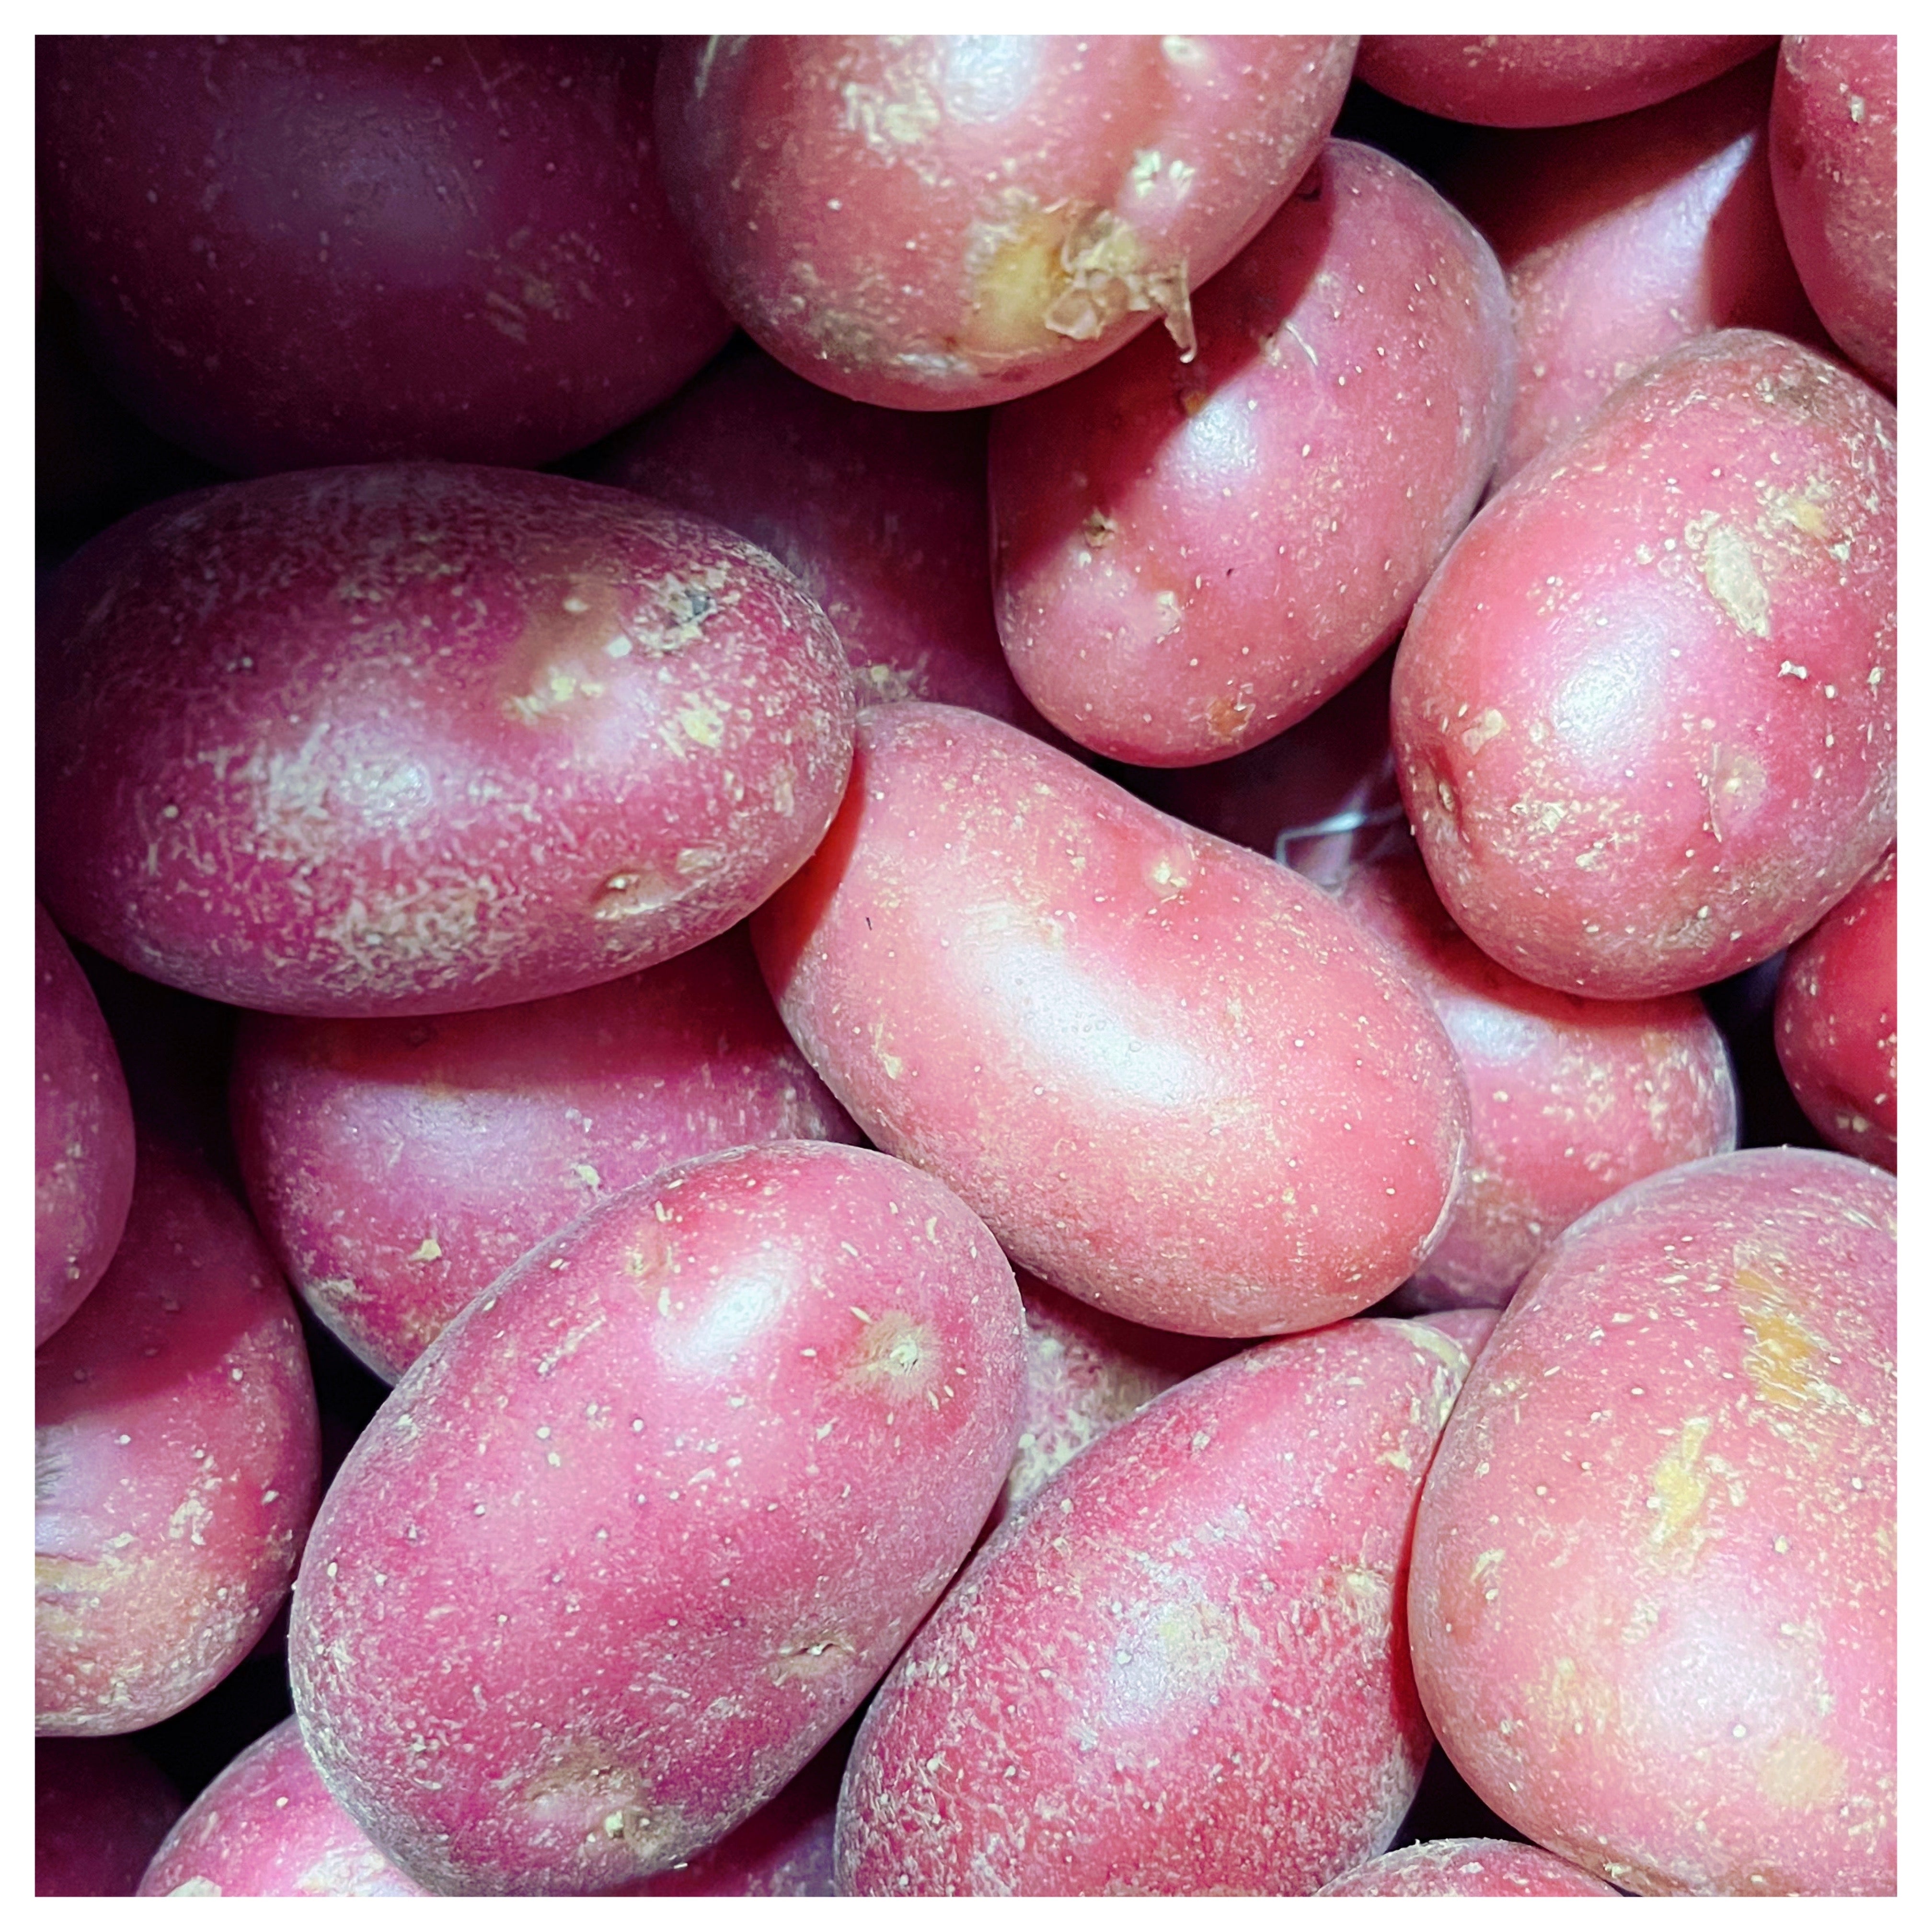 Potatoes - Red washed - 1 Kg